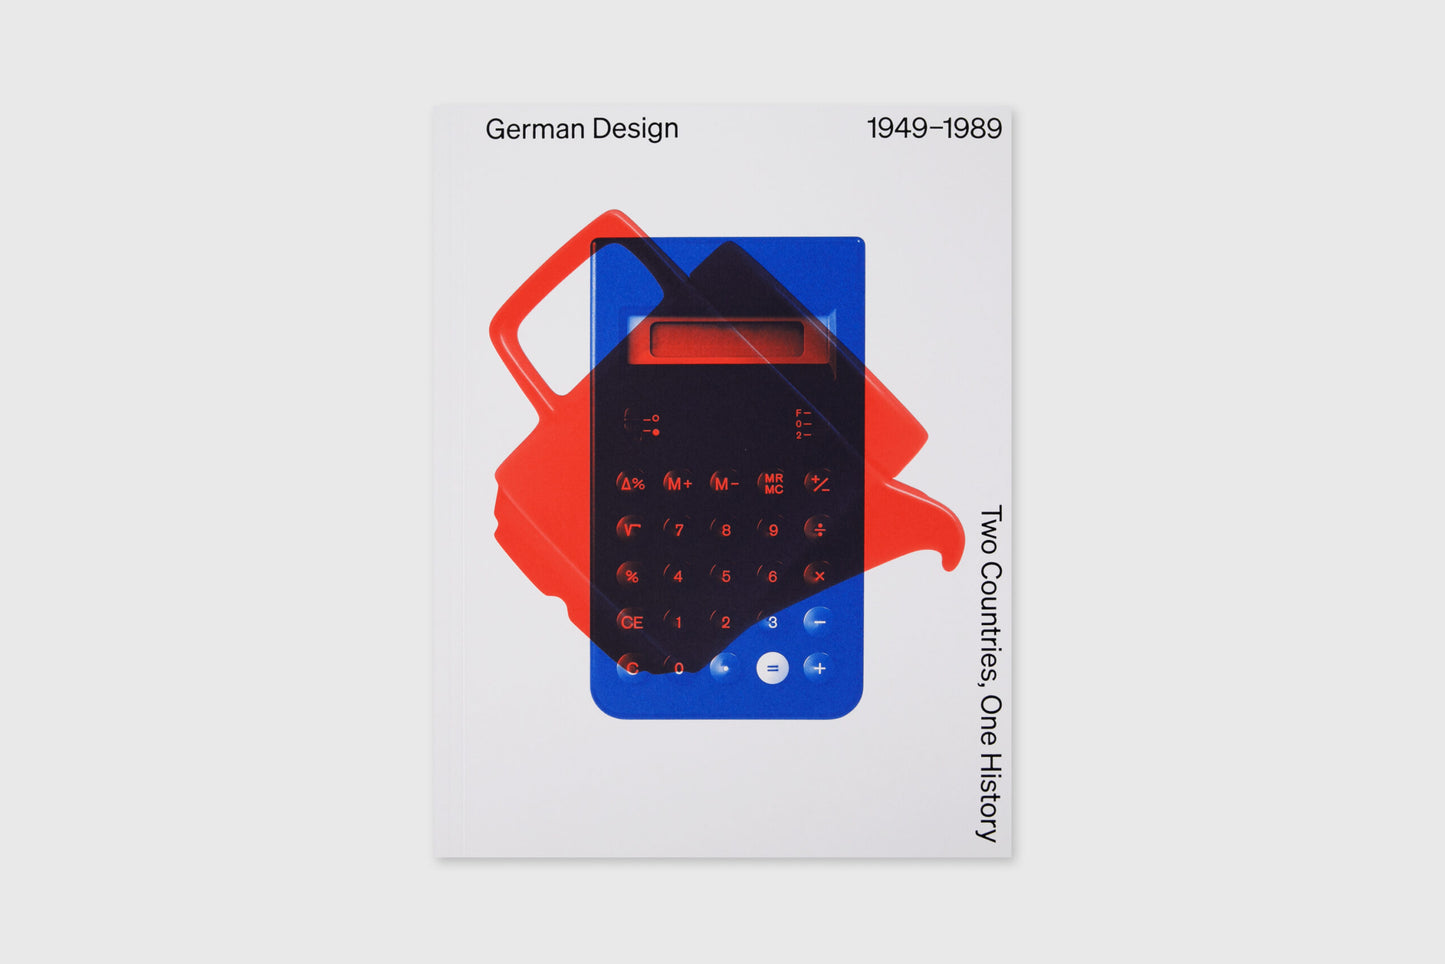 German Design 1949 – 1989: Two Countries, One History